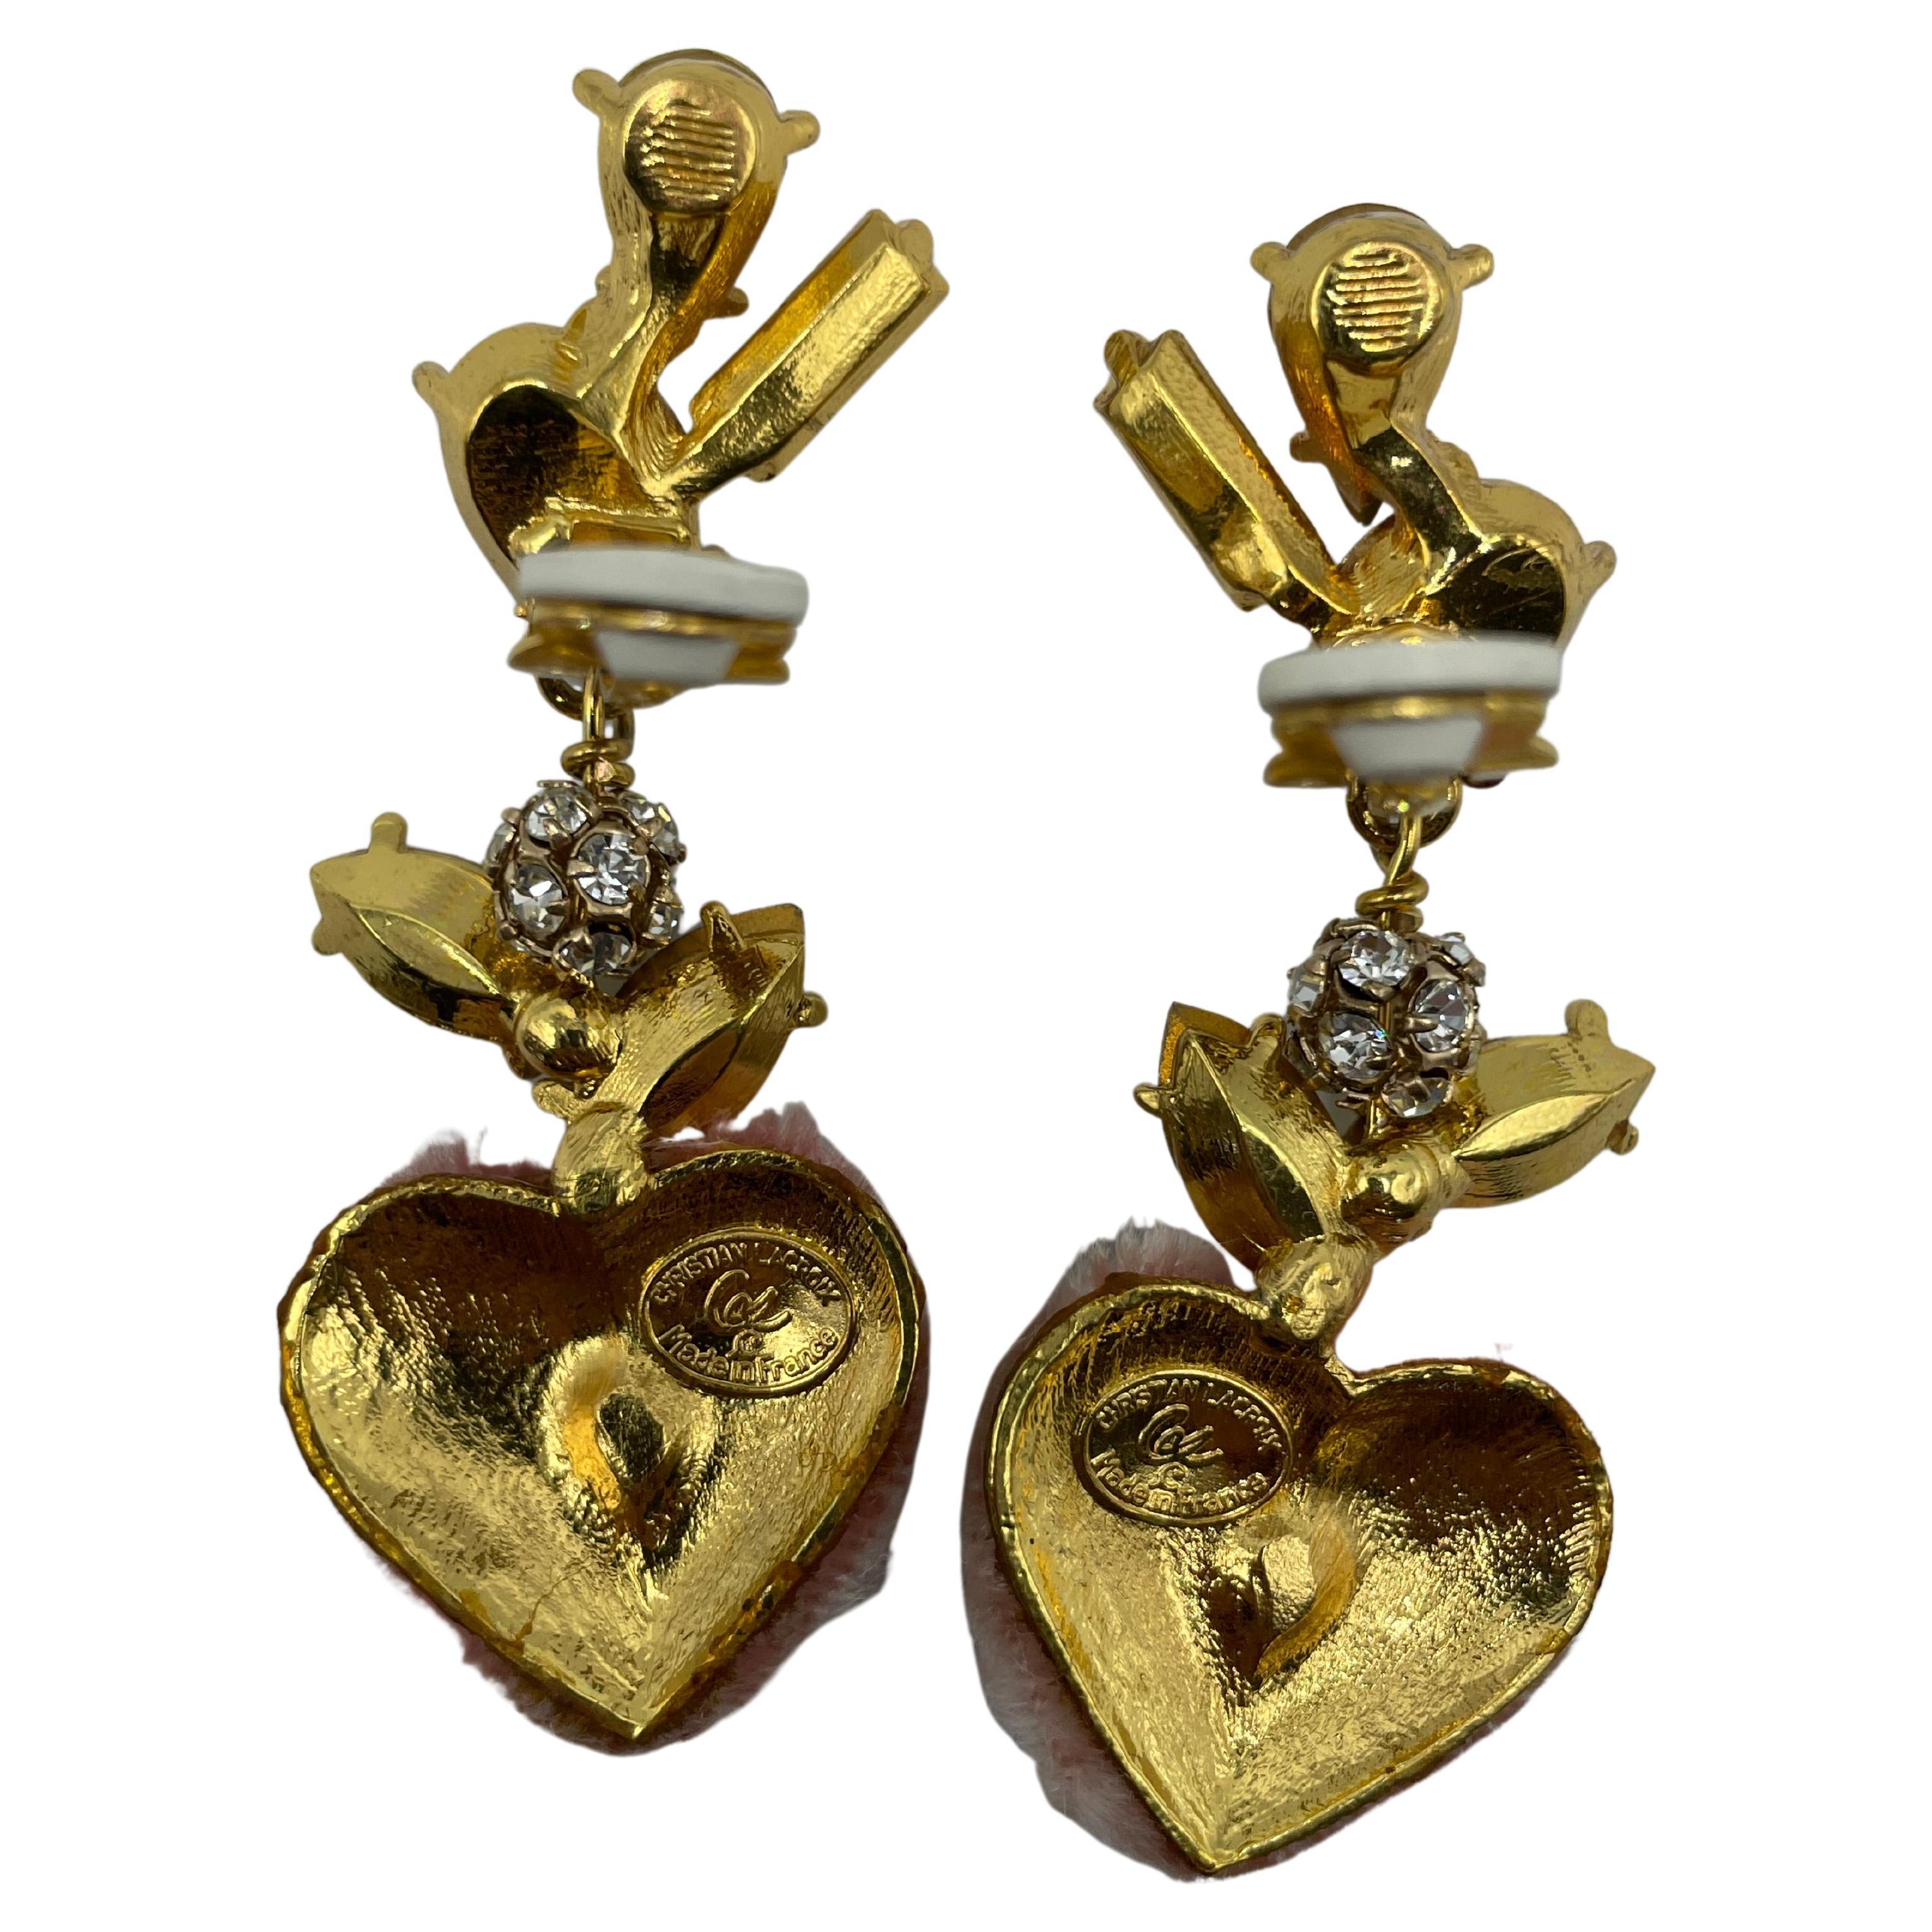 The heart-shaped pattern on the earrings, which Christian Lacroix frequently employed to create his jewelry, is a representation of his creative aesthetic.
With the Christian Lacroix stamp on the reverse, made in France. In good condition and